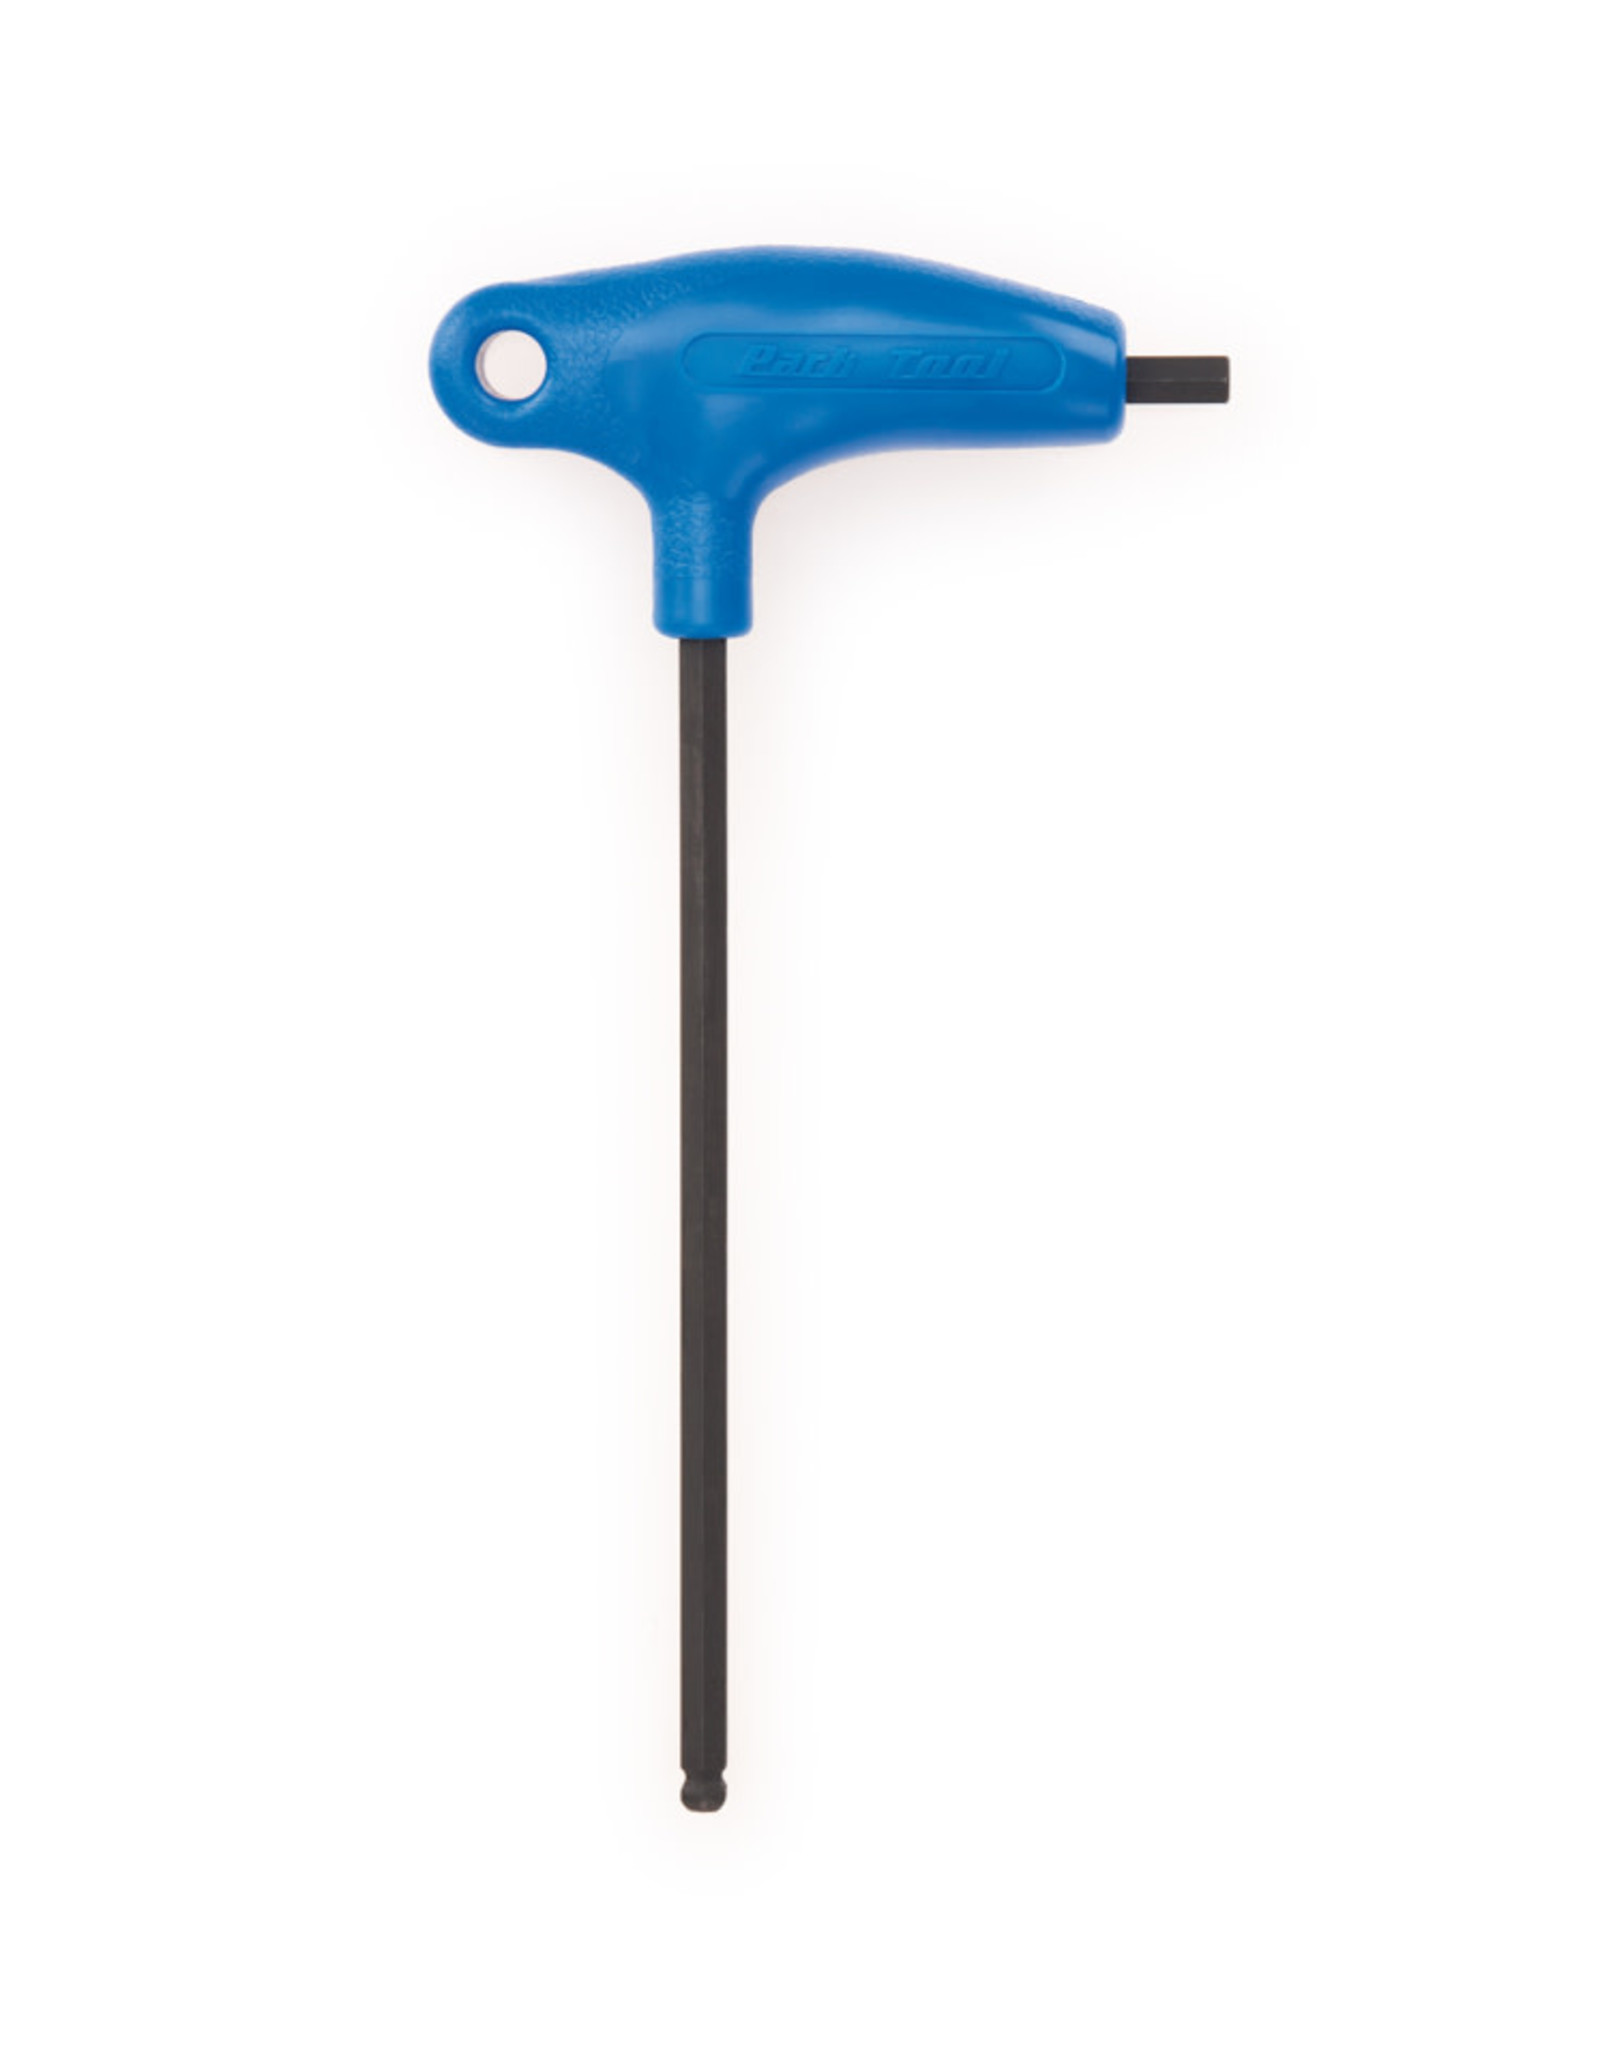 Park Tool PH-6 P-Handled 6mm Hex Wrench